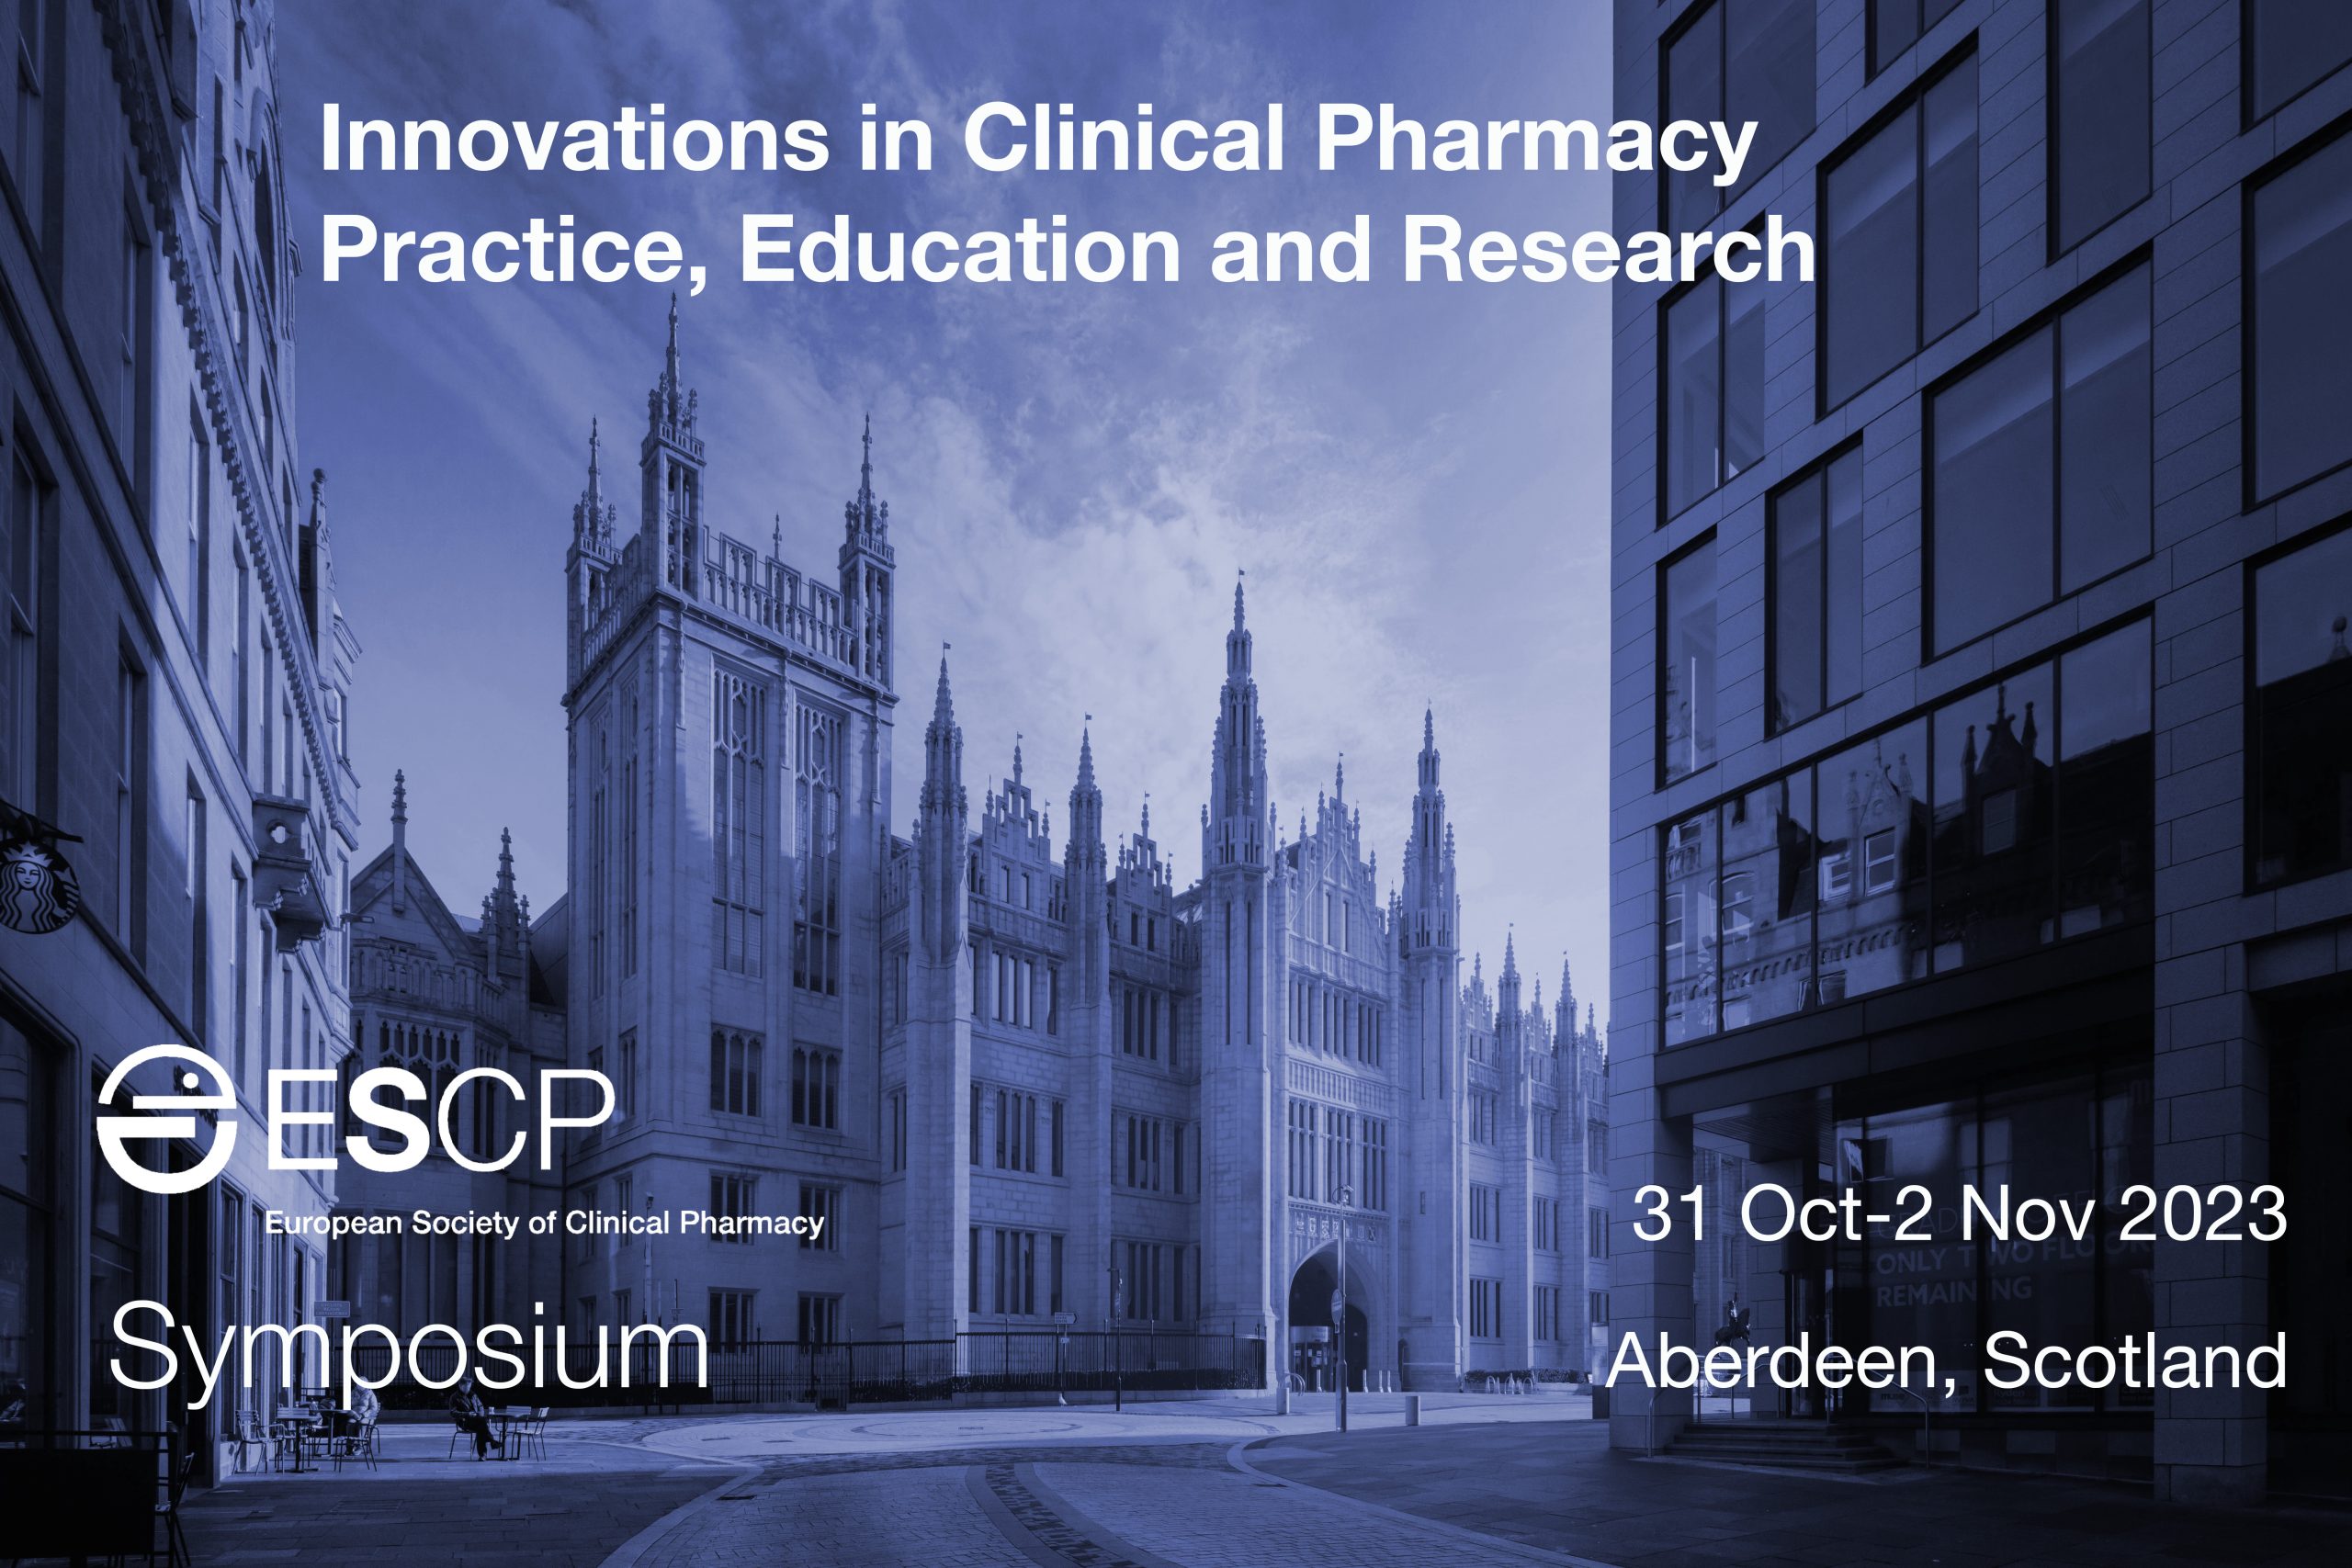 ESCP Aberdeen Symposium 2023: Innovations in Clinical Pharmacy Practice, Education and Research